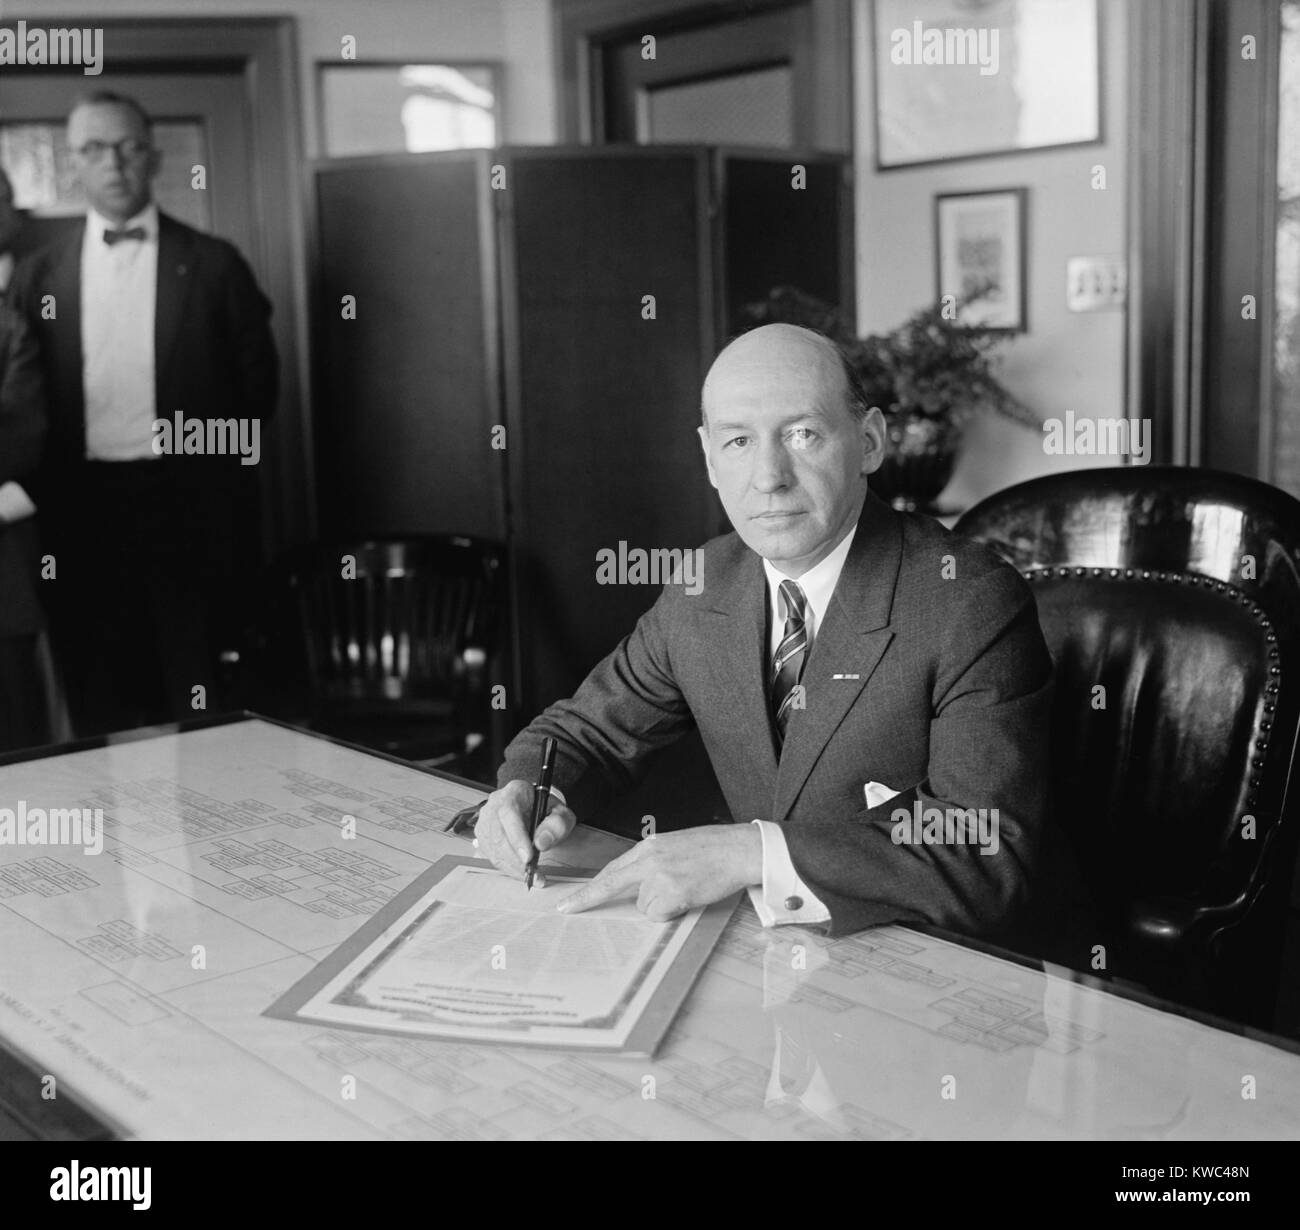 Veteran's Bureau head, Gen. Frank T. Hines, May 20, 1924. He replaced the corrupt Charles Forbes. Hines served as head of the Veteran's Bureau until 1930, then as administrator of its successor, the Veteran's Administration, from 1930 to 1945. (BSLOC 2015 15 130) Stock Photo